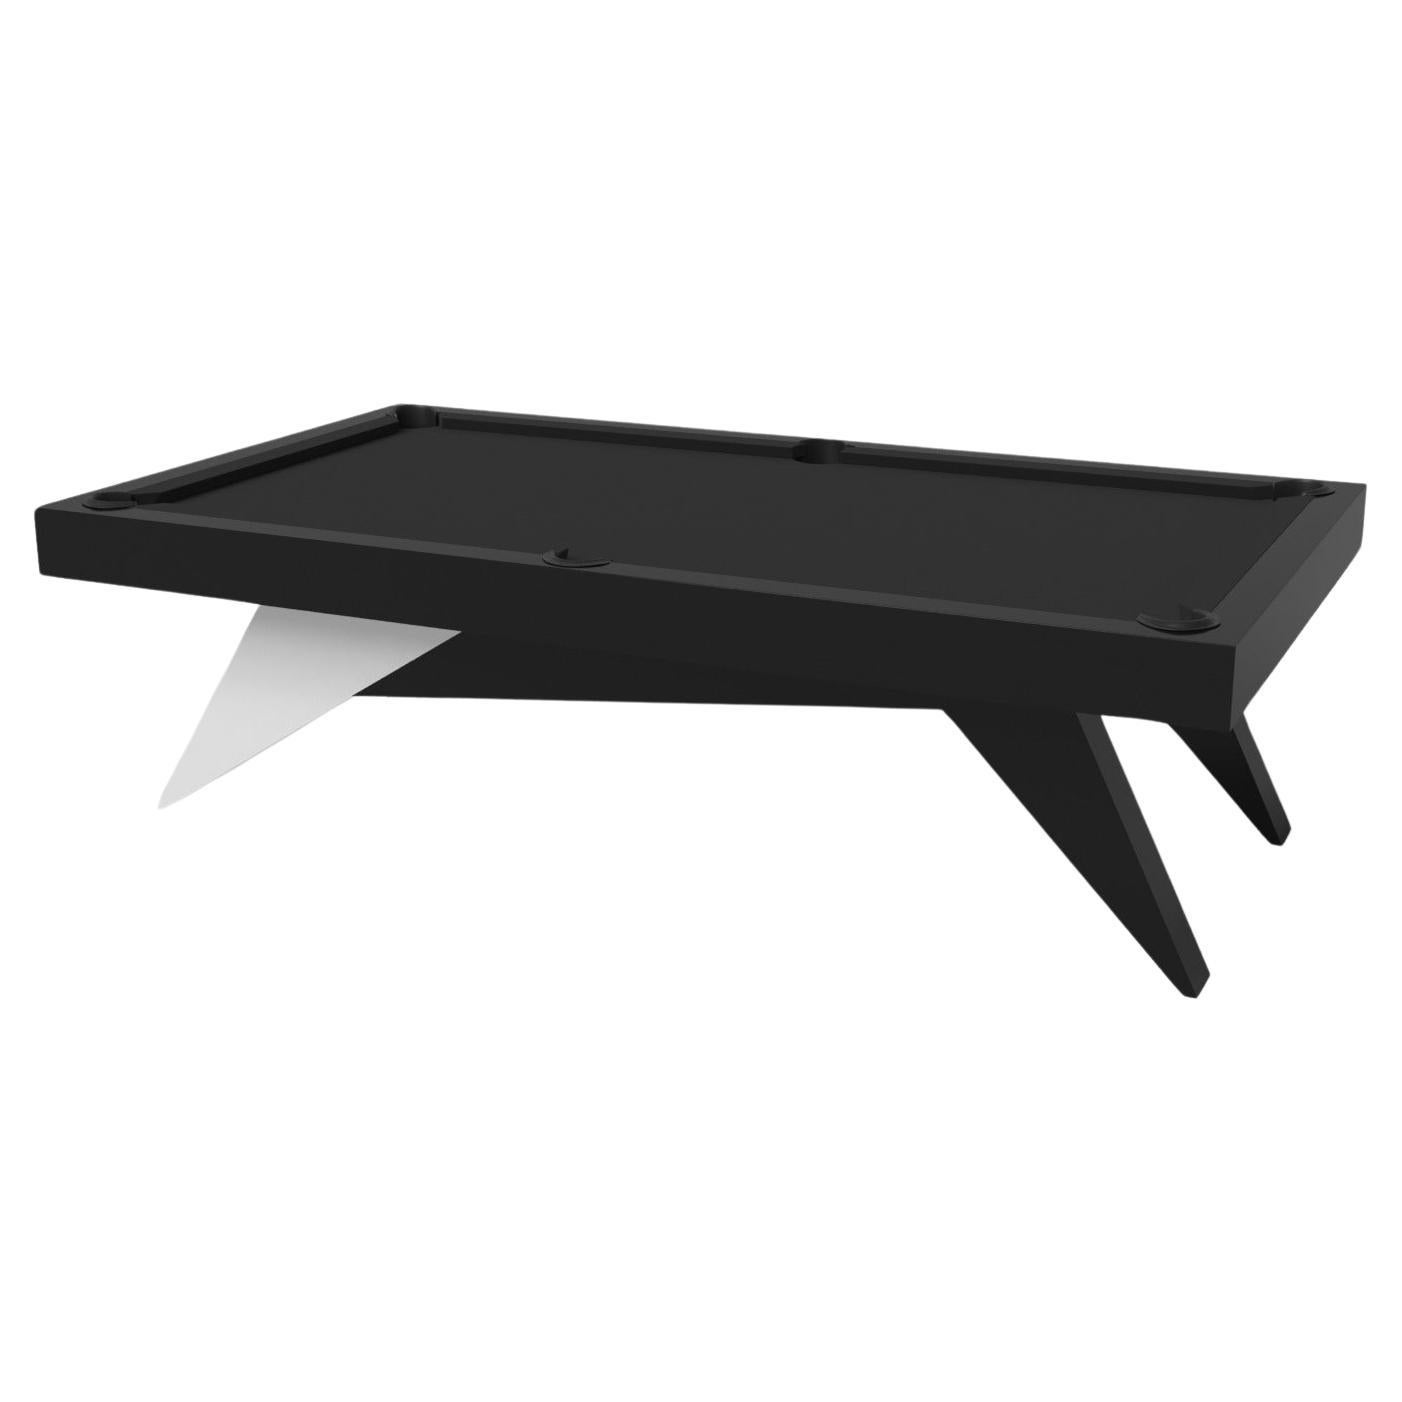 Elevate Customs Mantis Pool Table / Solid Pantone Black in 8.5' - Made in USA For Sale